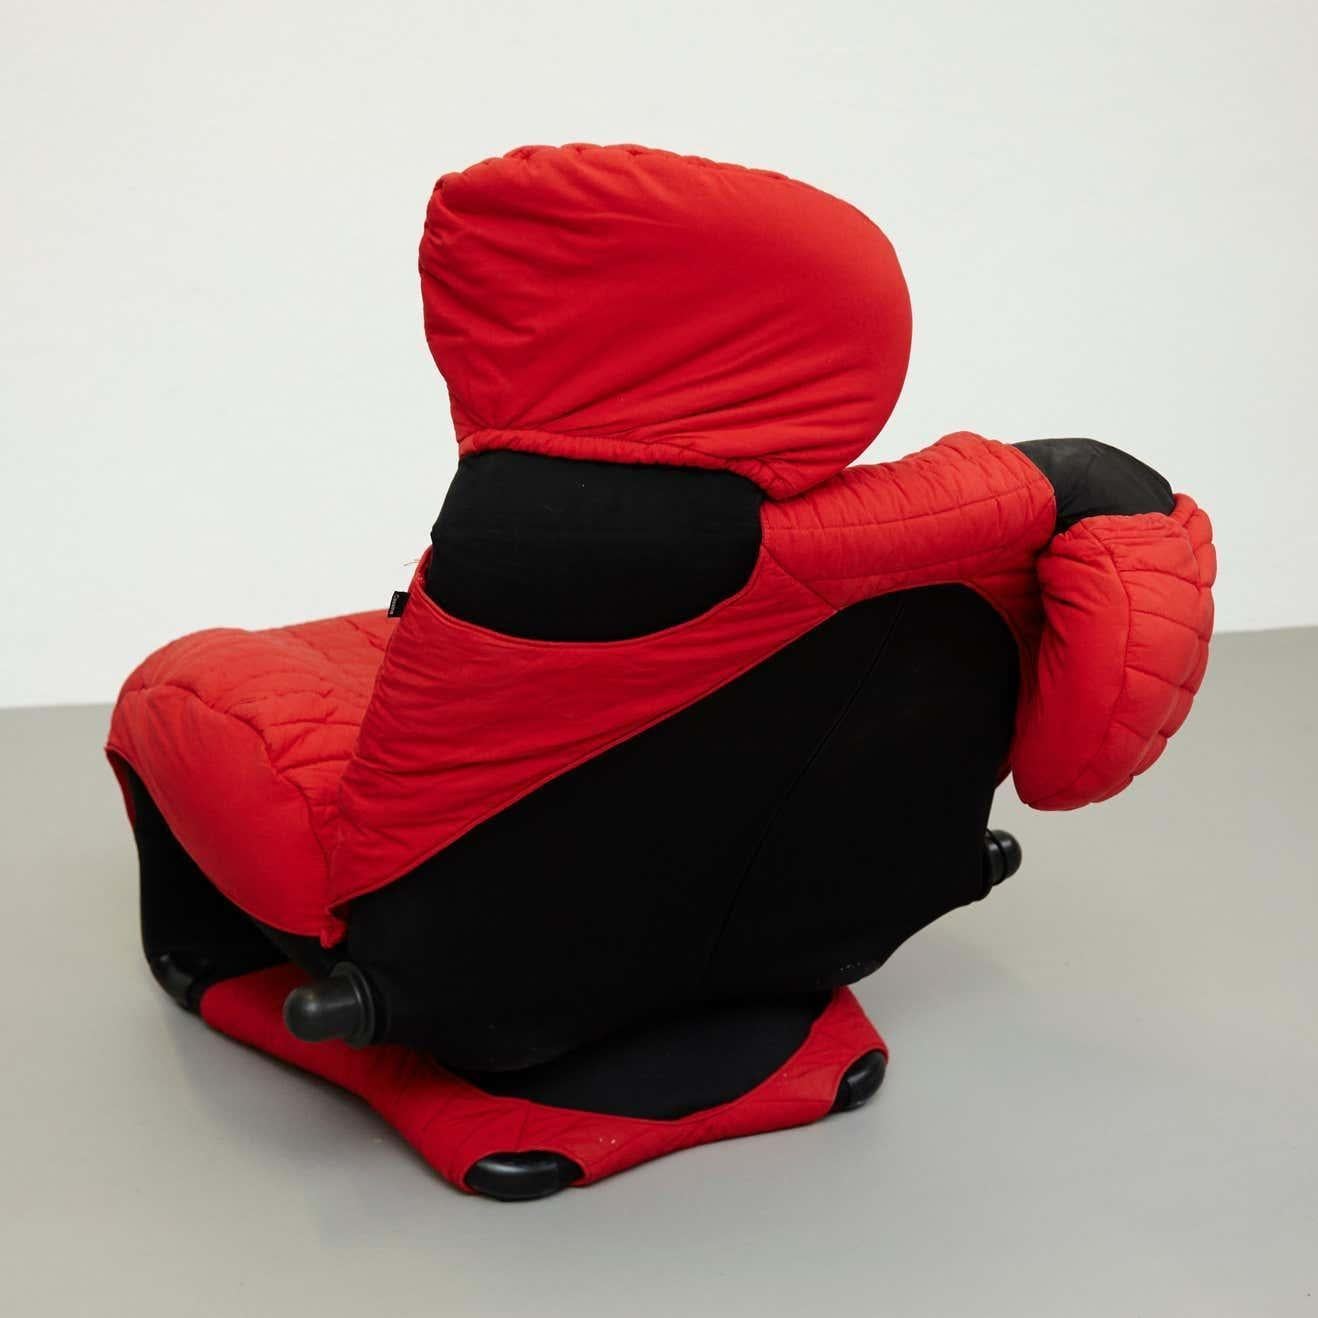 Italian Toshiyuki Kita Wink 111 Armchair in Black and Red by Cassina, circa 1980 For Sale